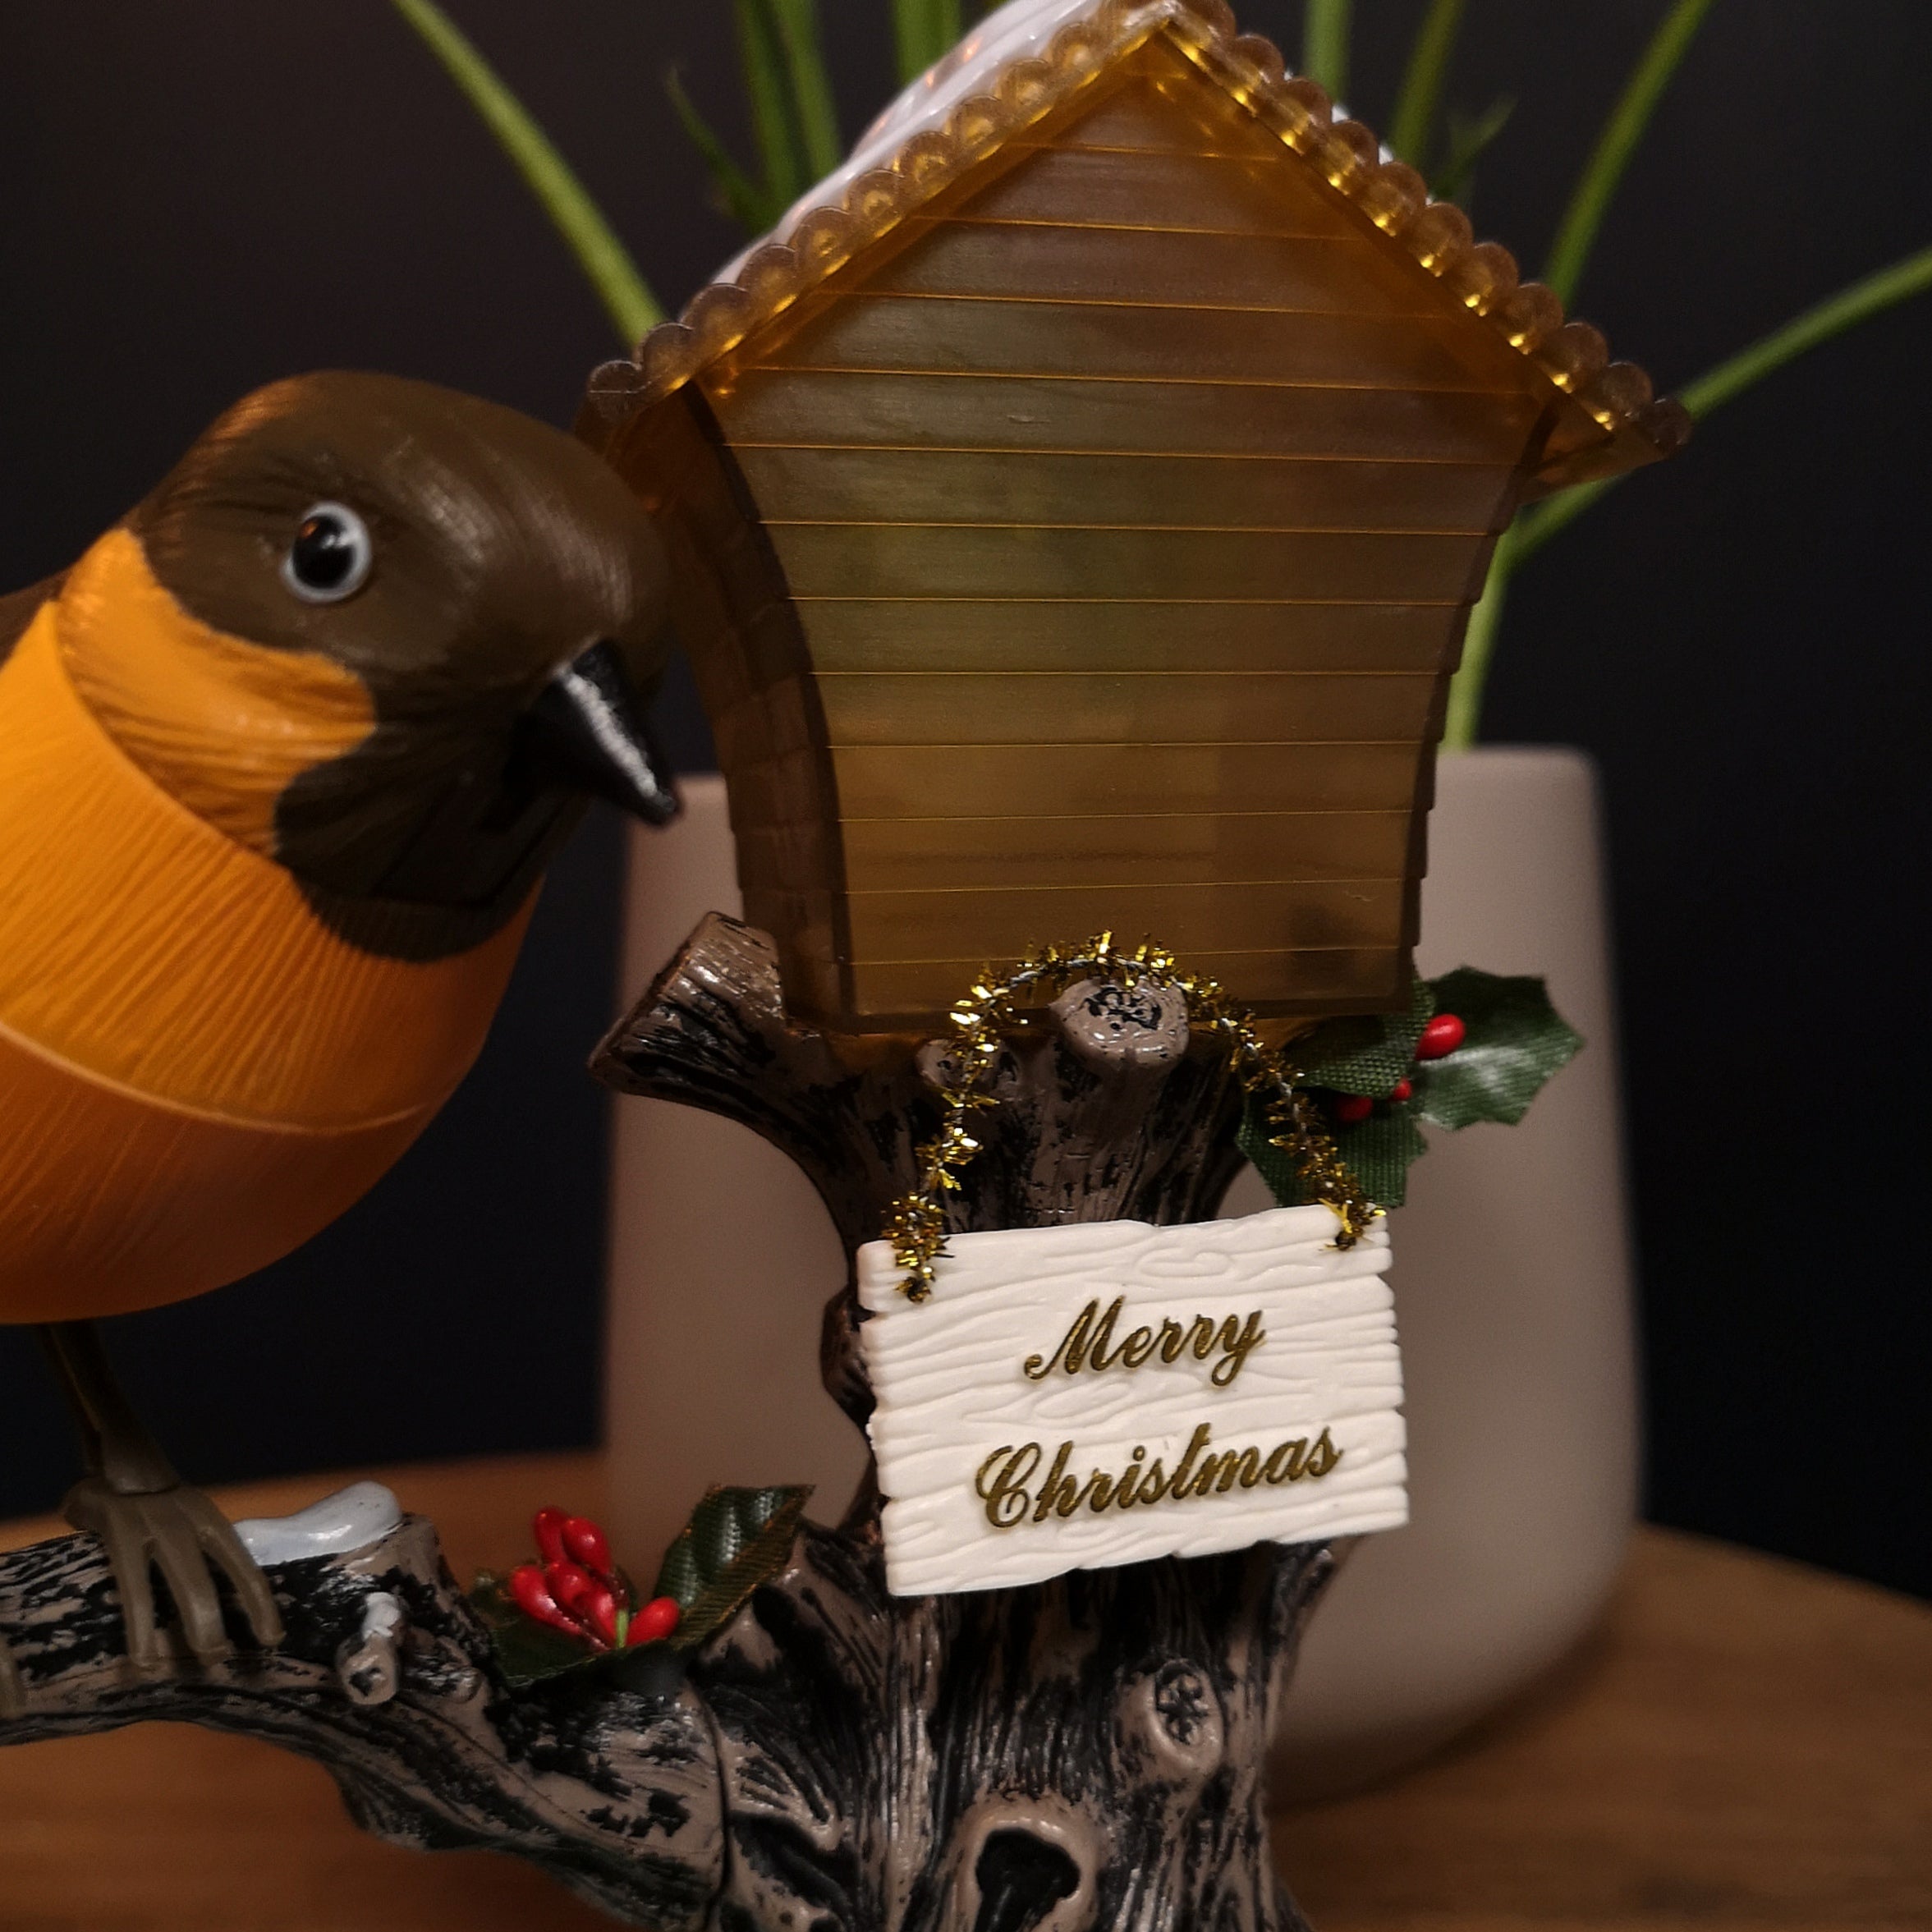 Sound Activated Animated Robin on House Chirps "We Wish You a Merry Christmas"